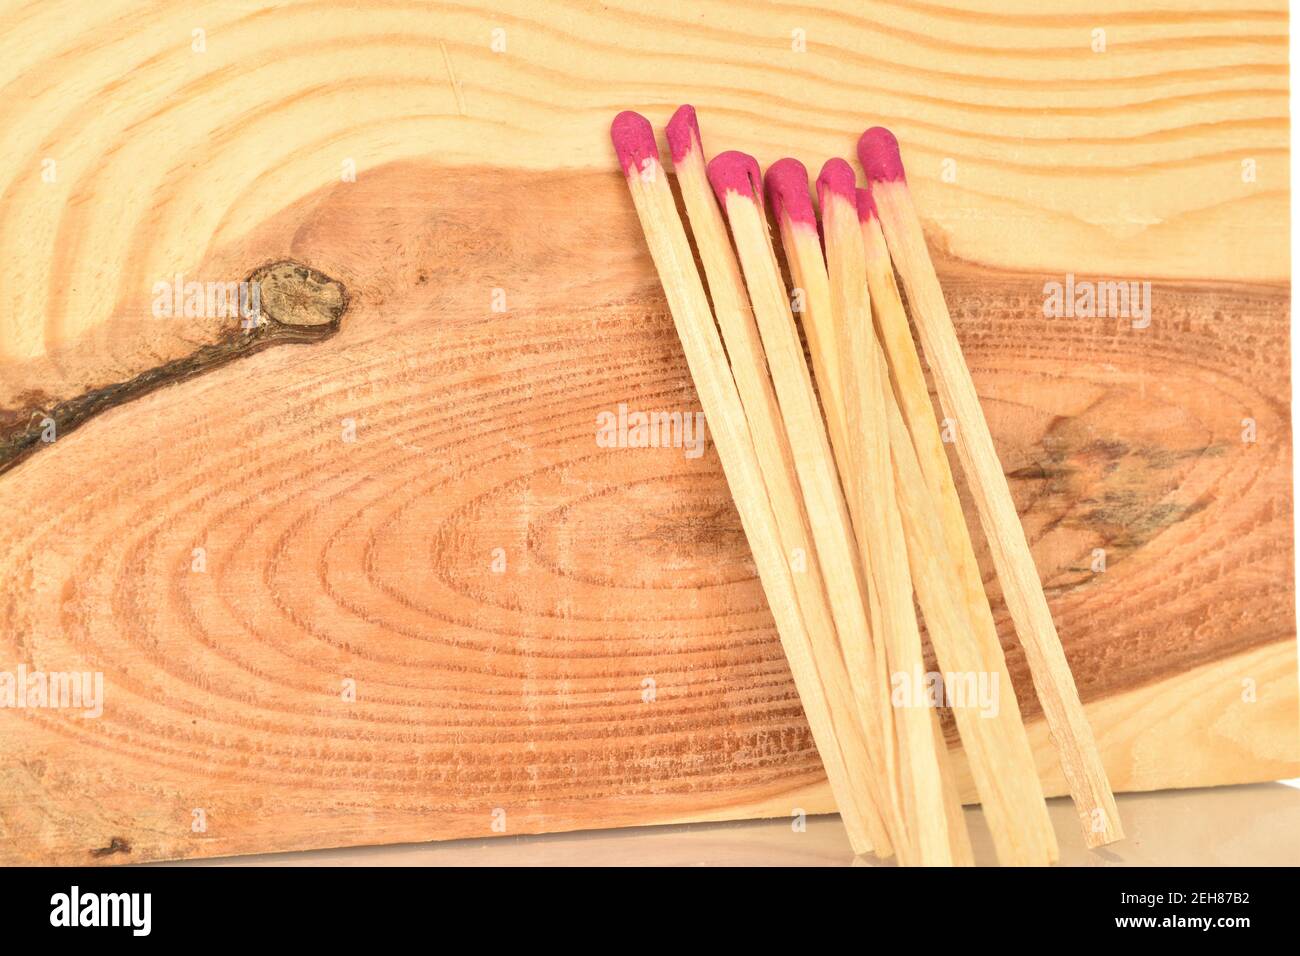 Several wooden matches on a natural wood background. Stock Photo